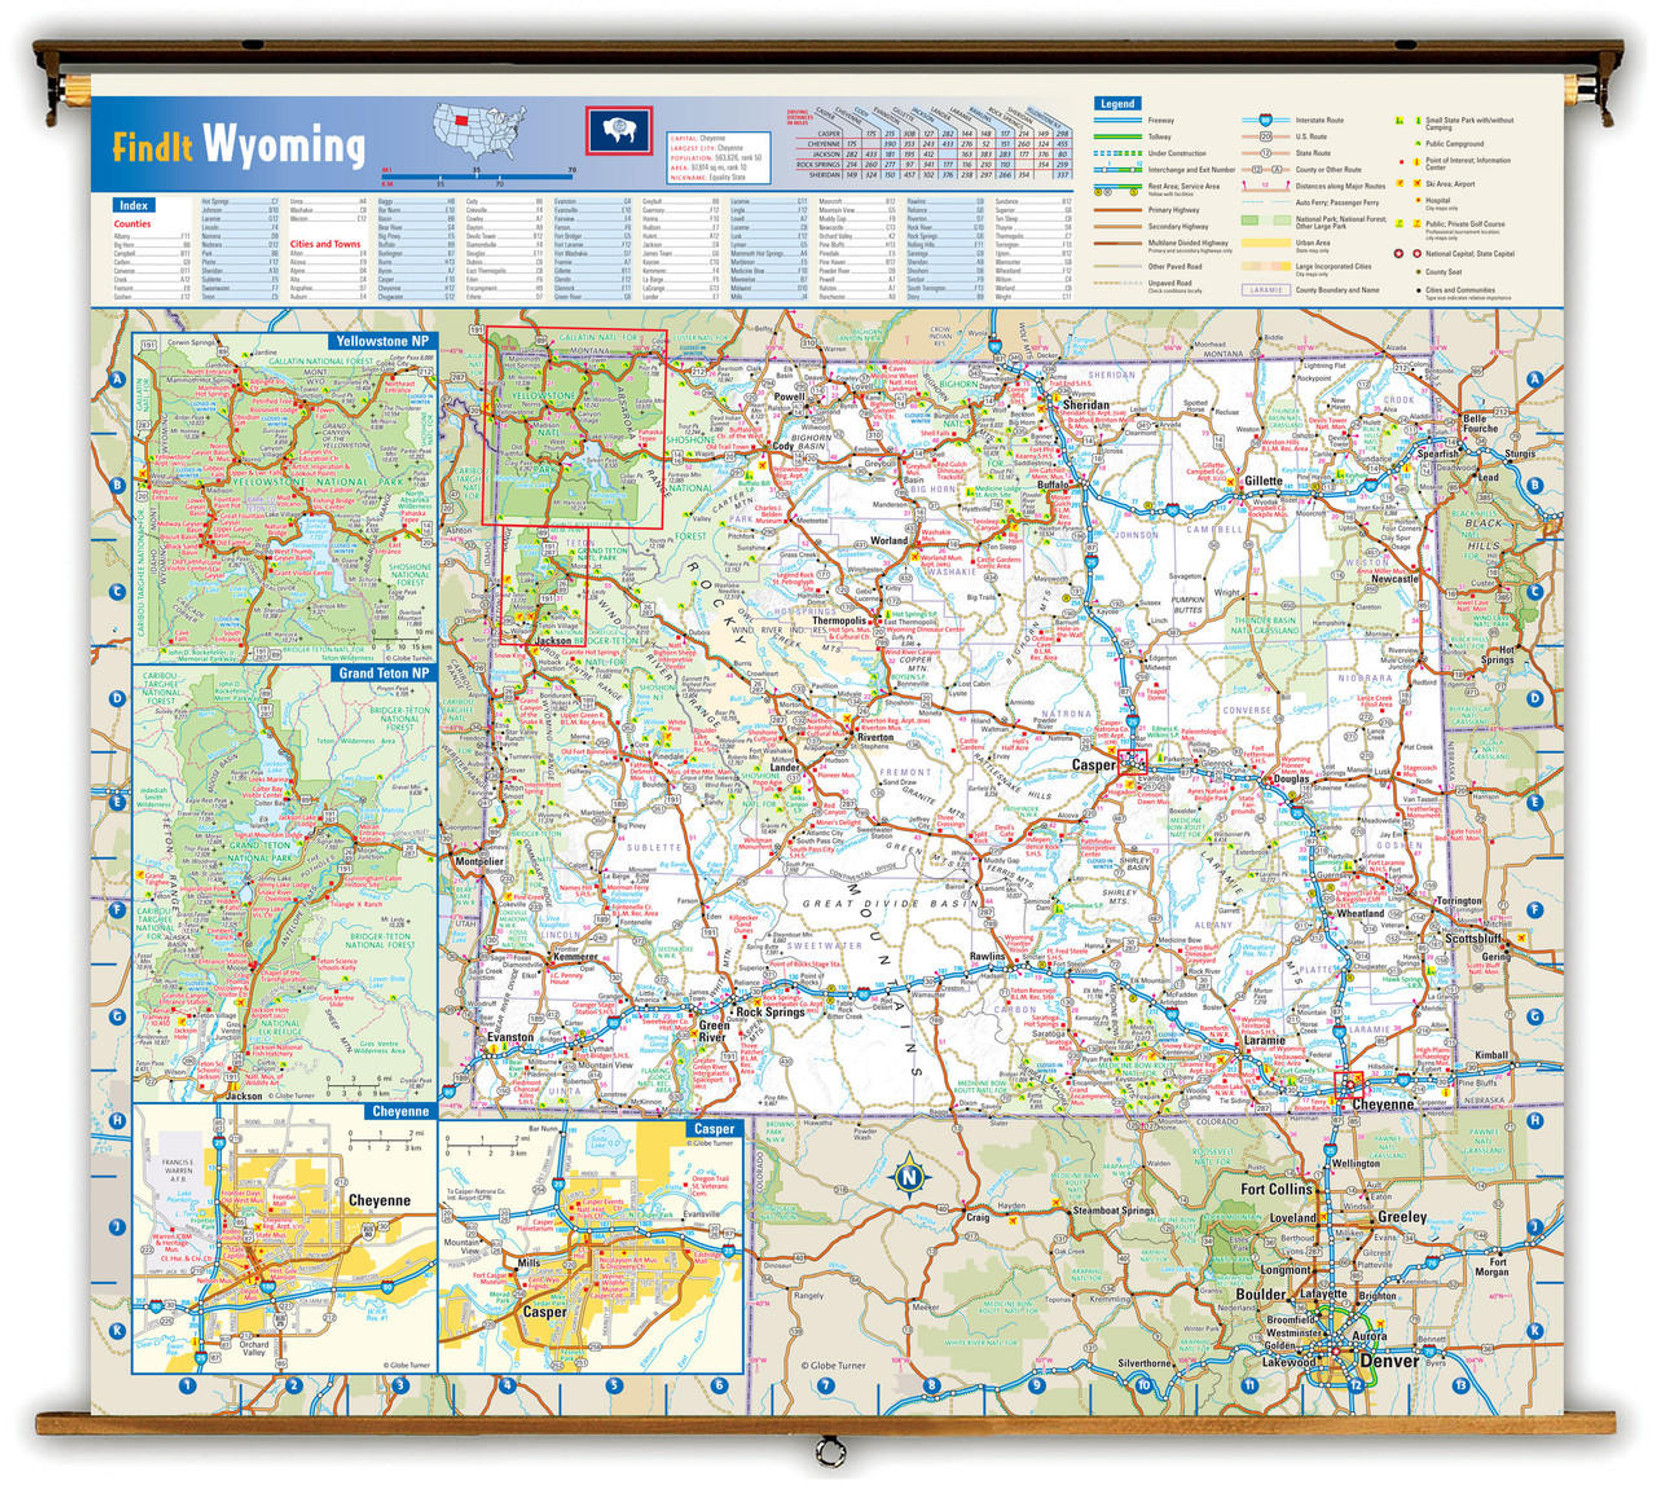 Wyoming Reference Pull-Down Map, image 1, World Maps Online